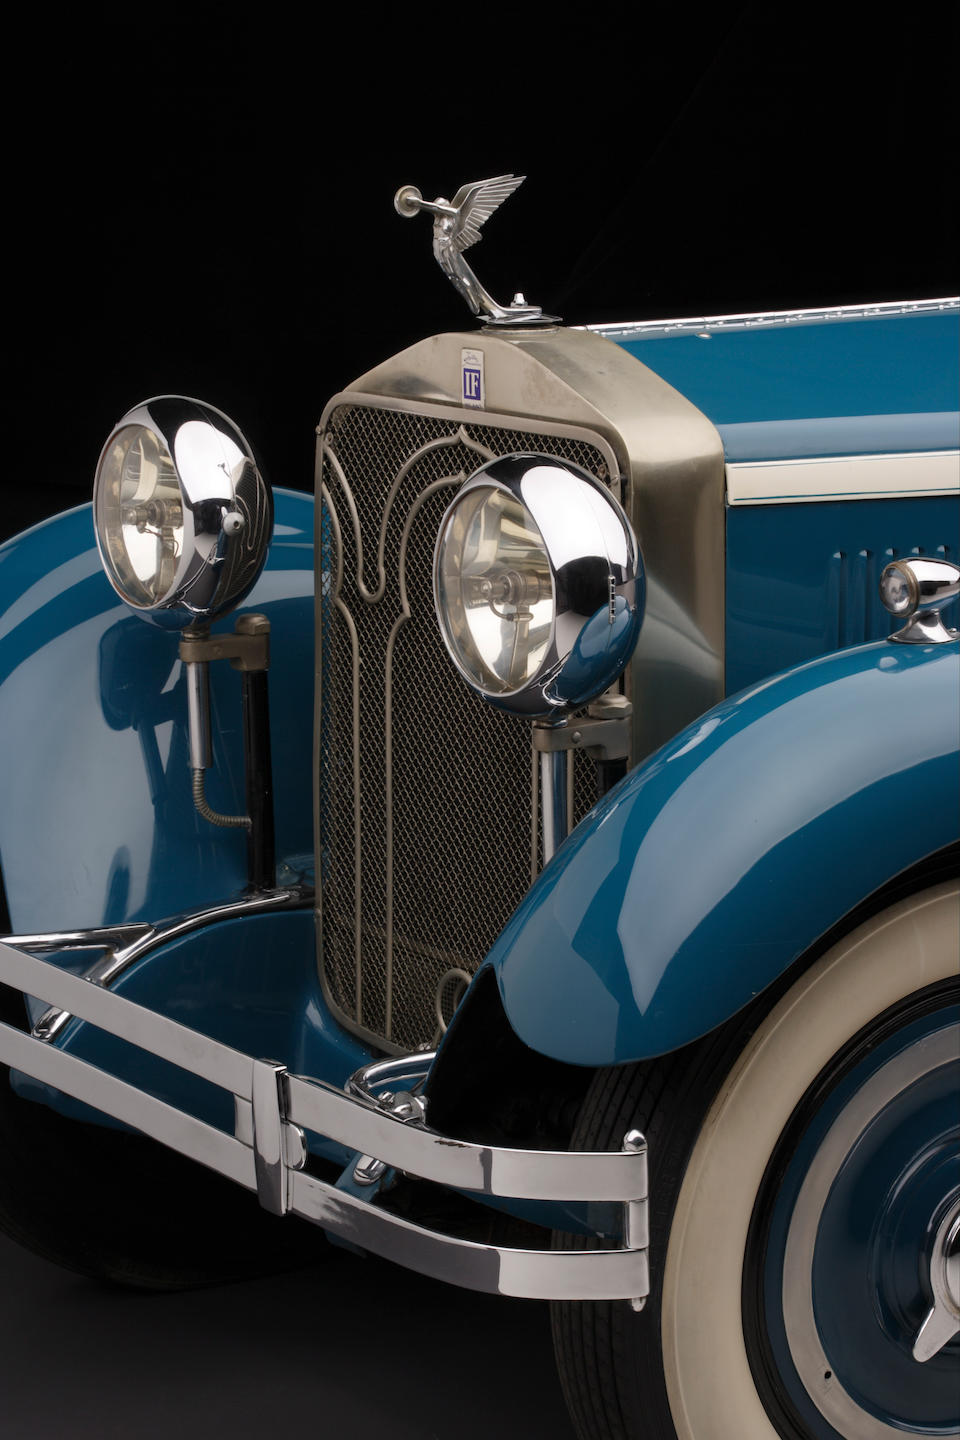 The New York Auto Show,1929 Isotta Fraschini Tipo 8A Roadster  Chassis no. 1485